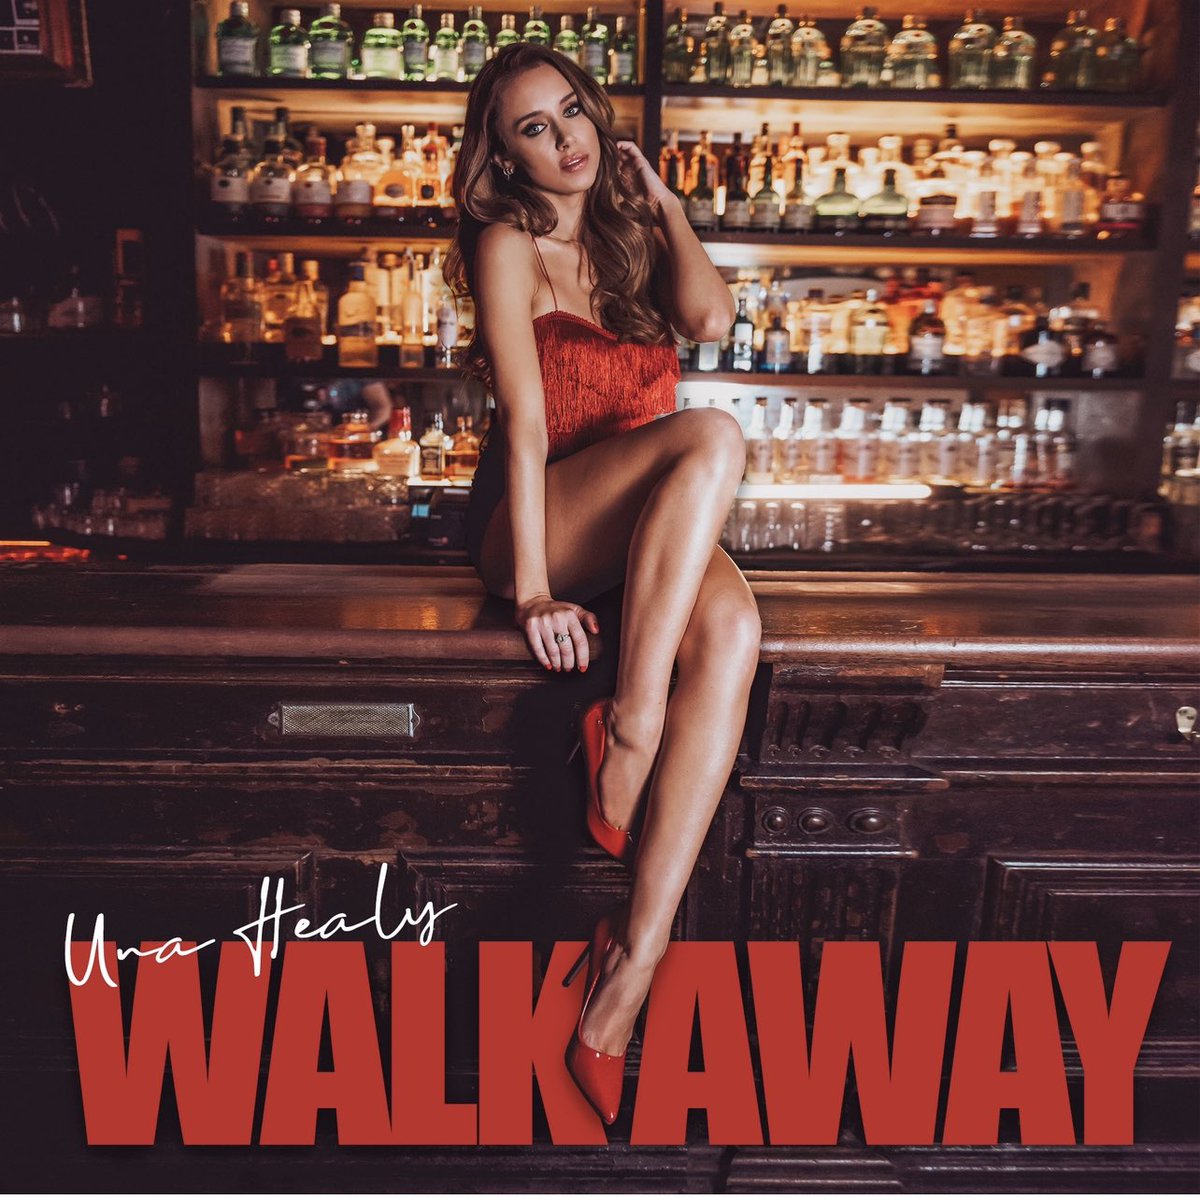 I’m so excited to announce that my new single “Walk Away” is coming out this Thursday June 1st. You can pre-save it now, link in bio x